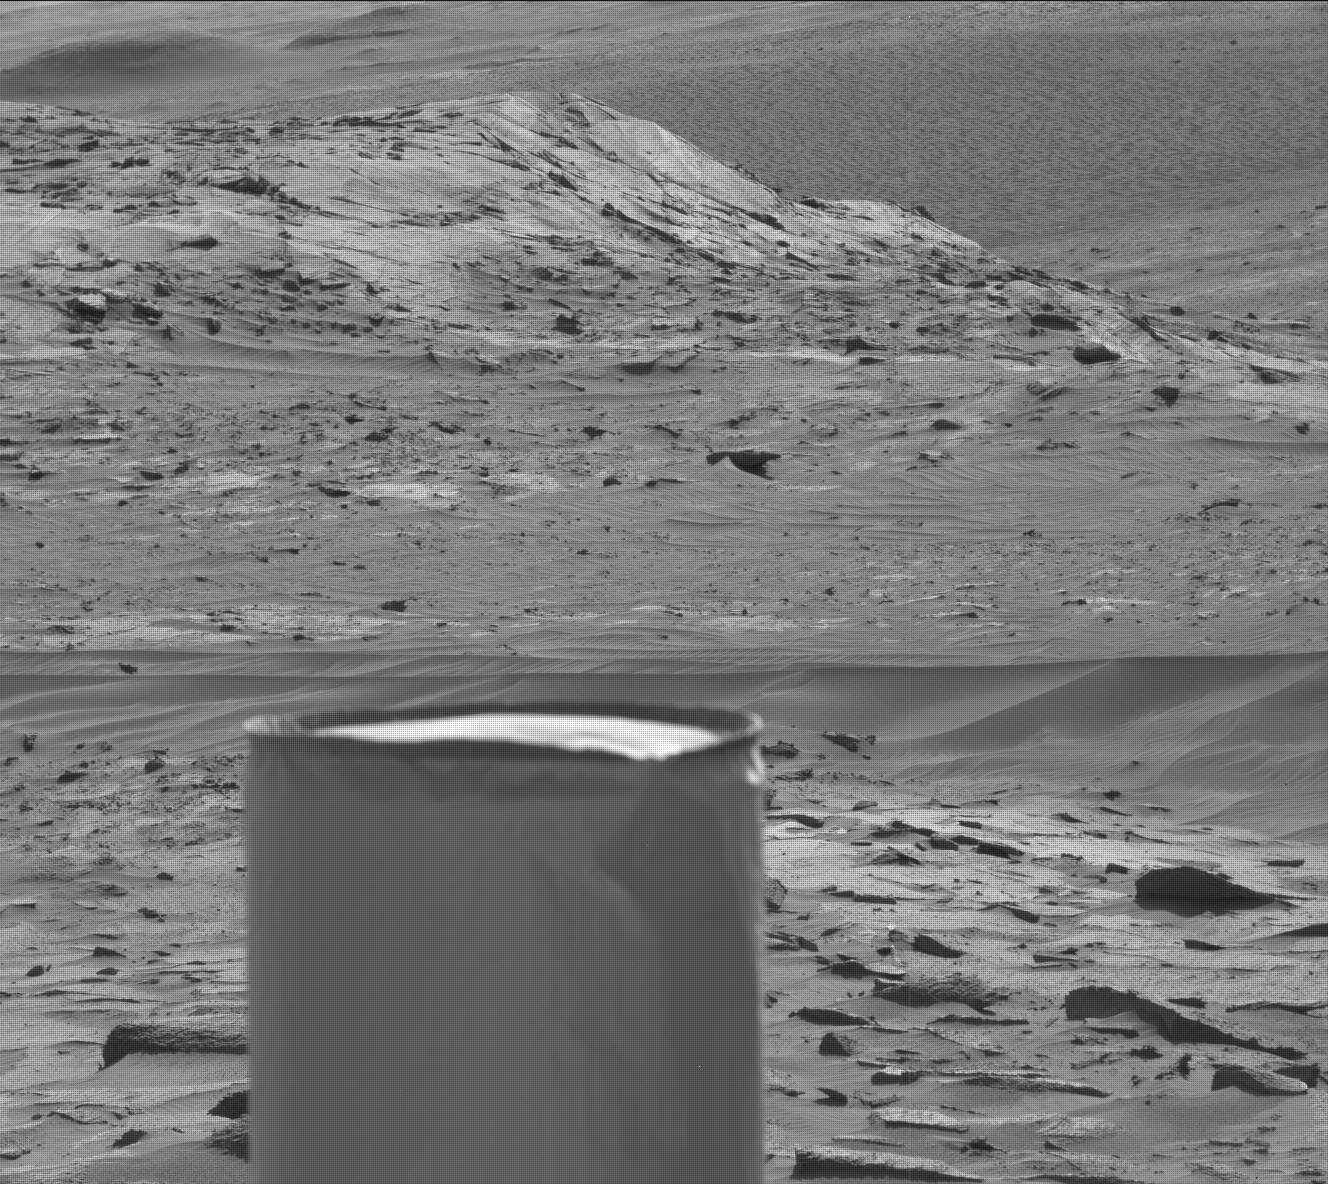 This is a black and white image of the smooth, sandy surface of Mars. There are two low hills in the background with lots of small scattered boulders.